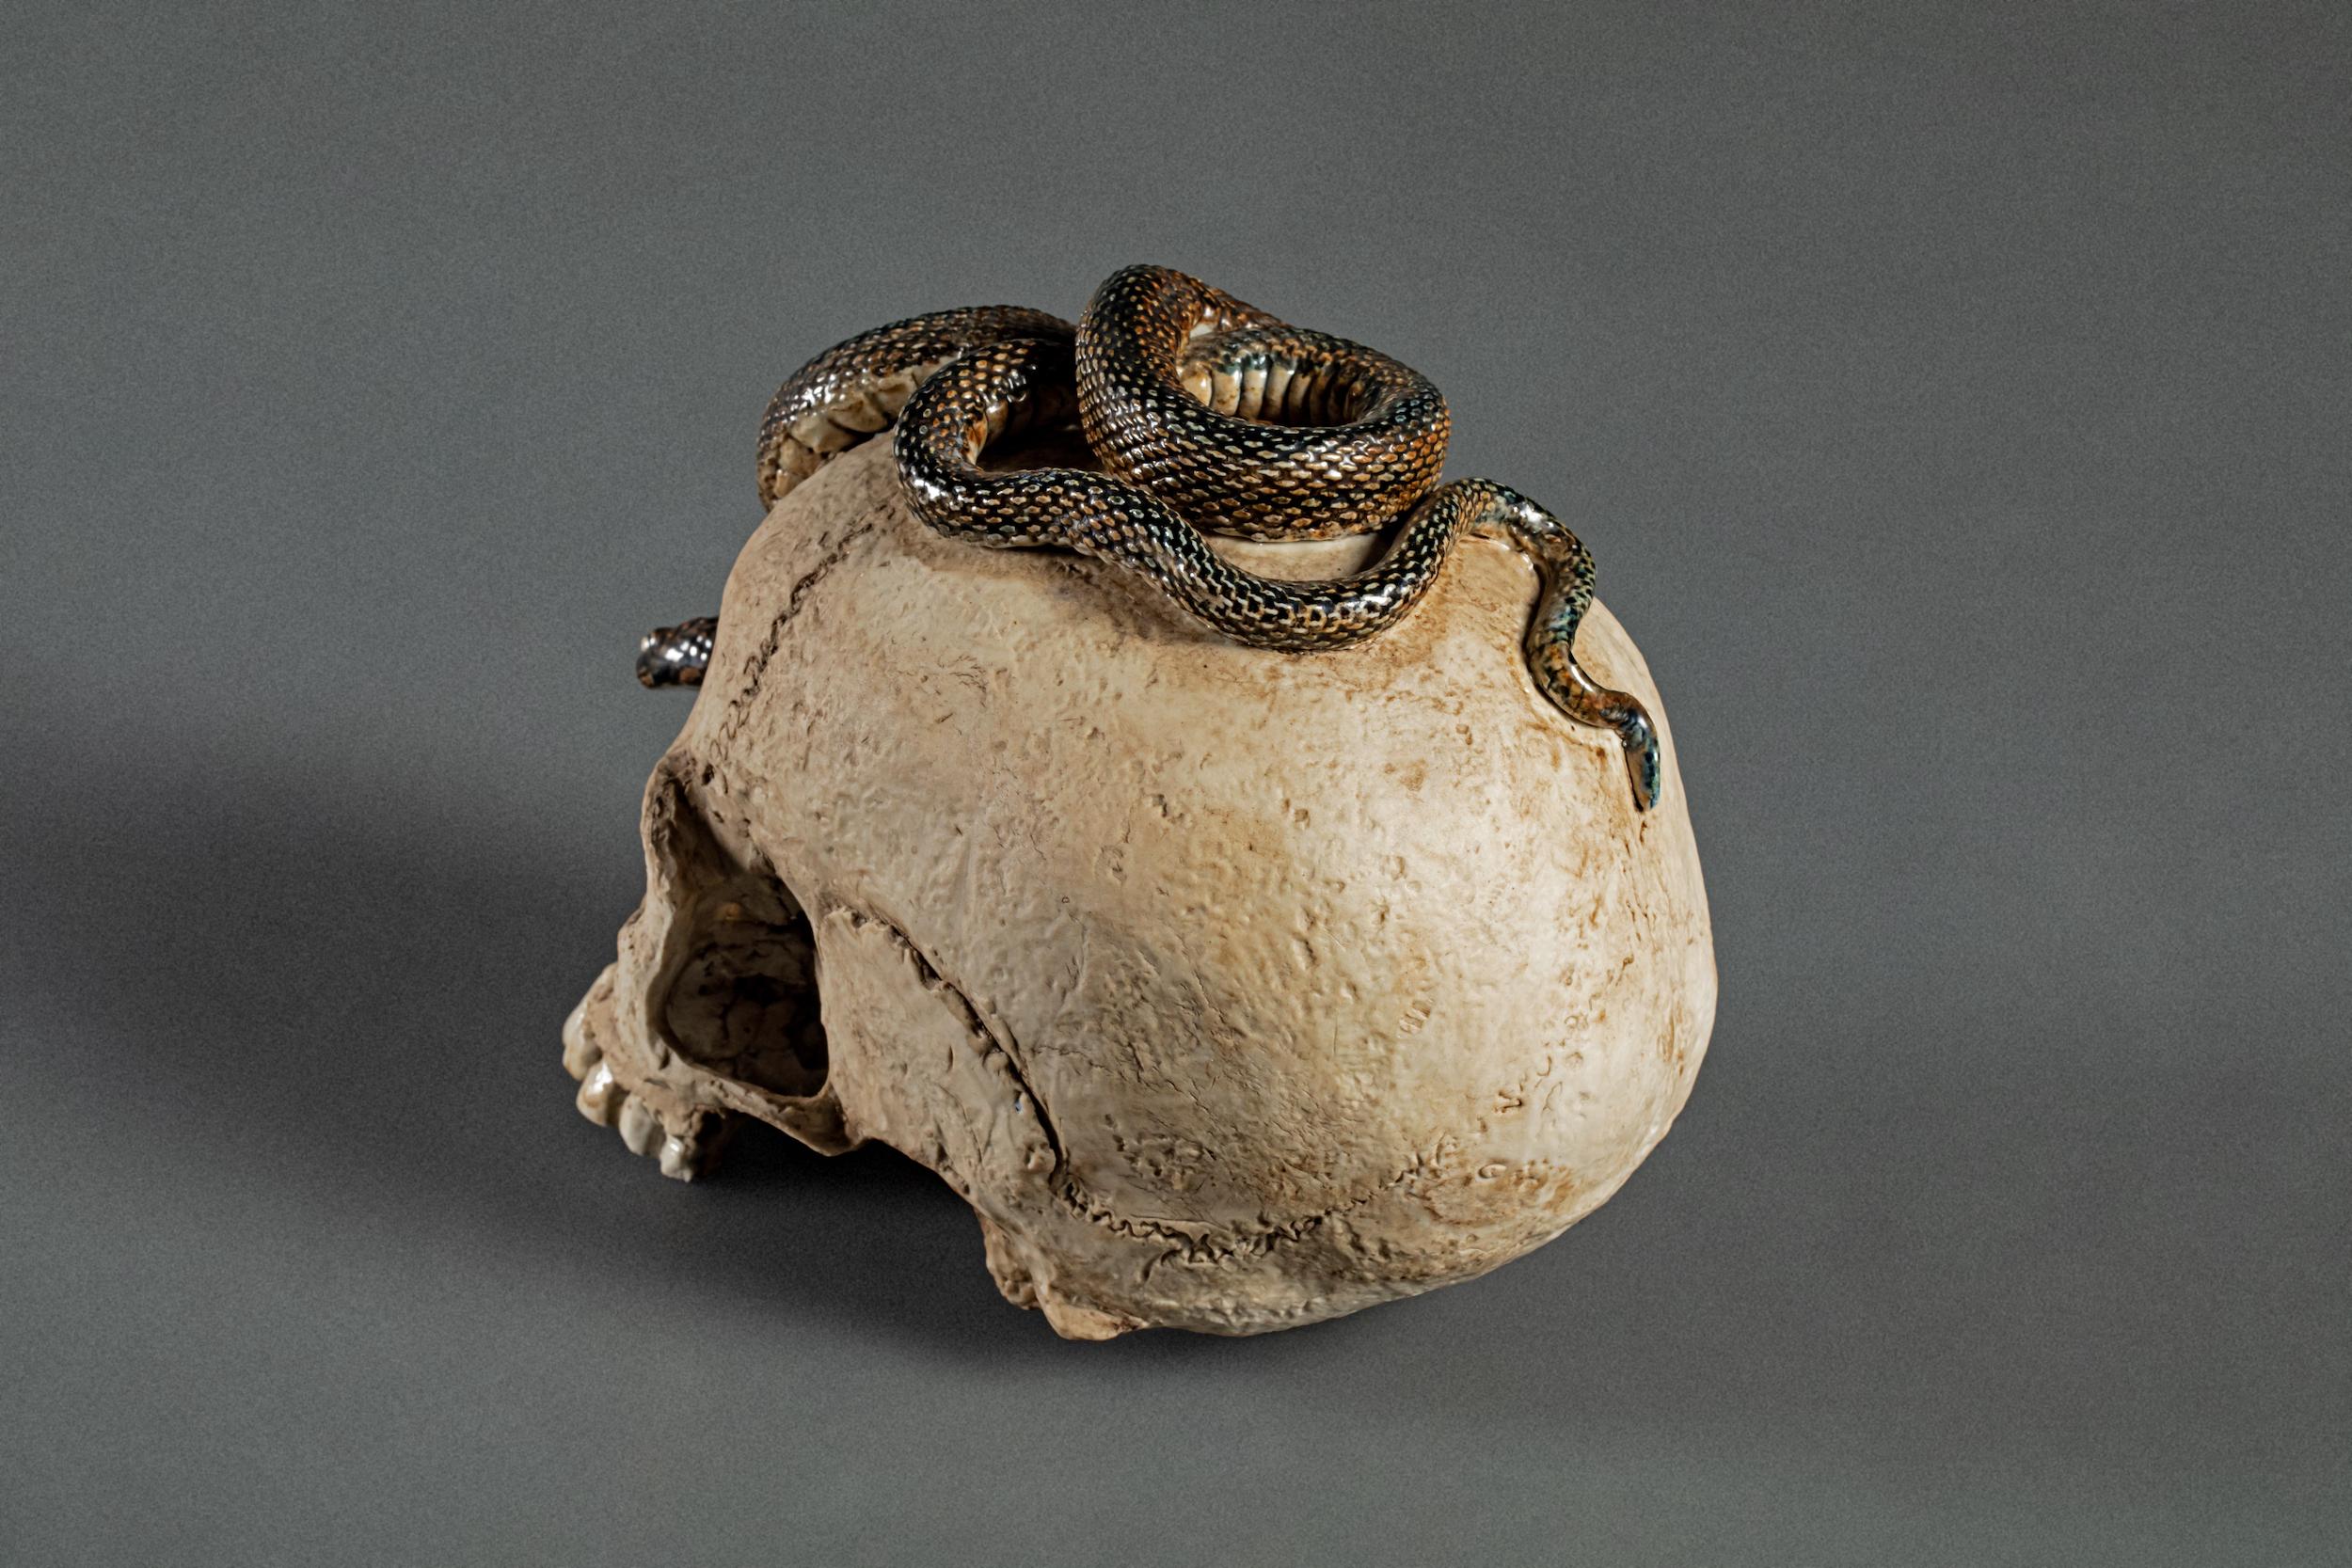 japanese snake with human head